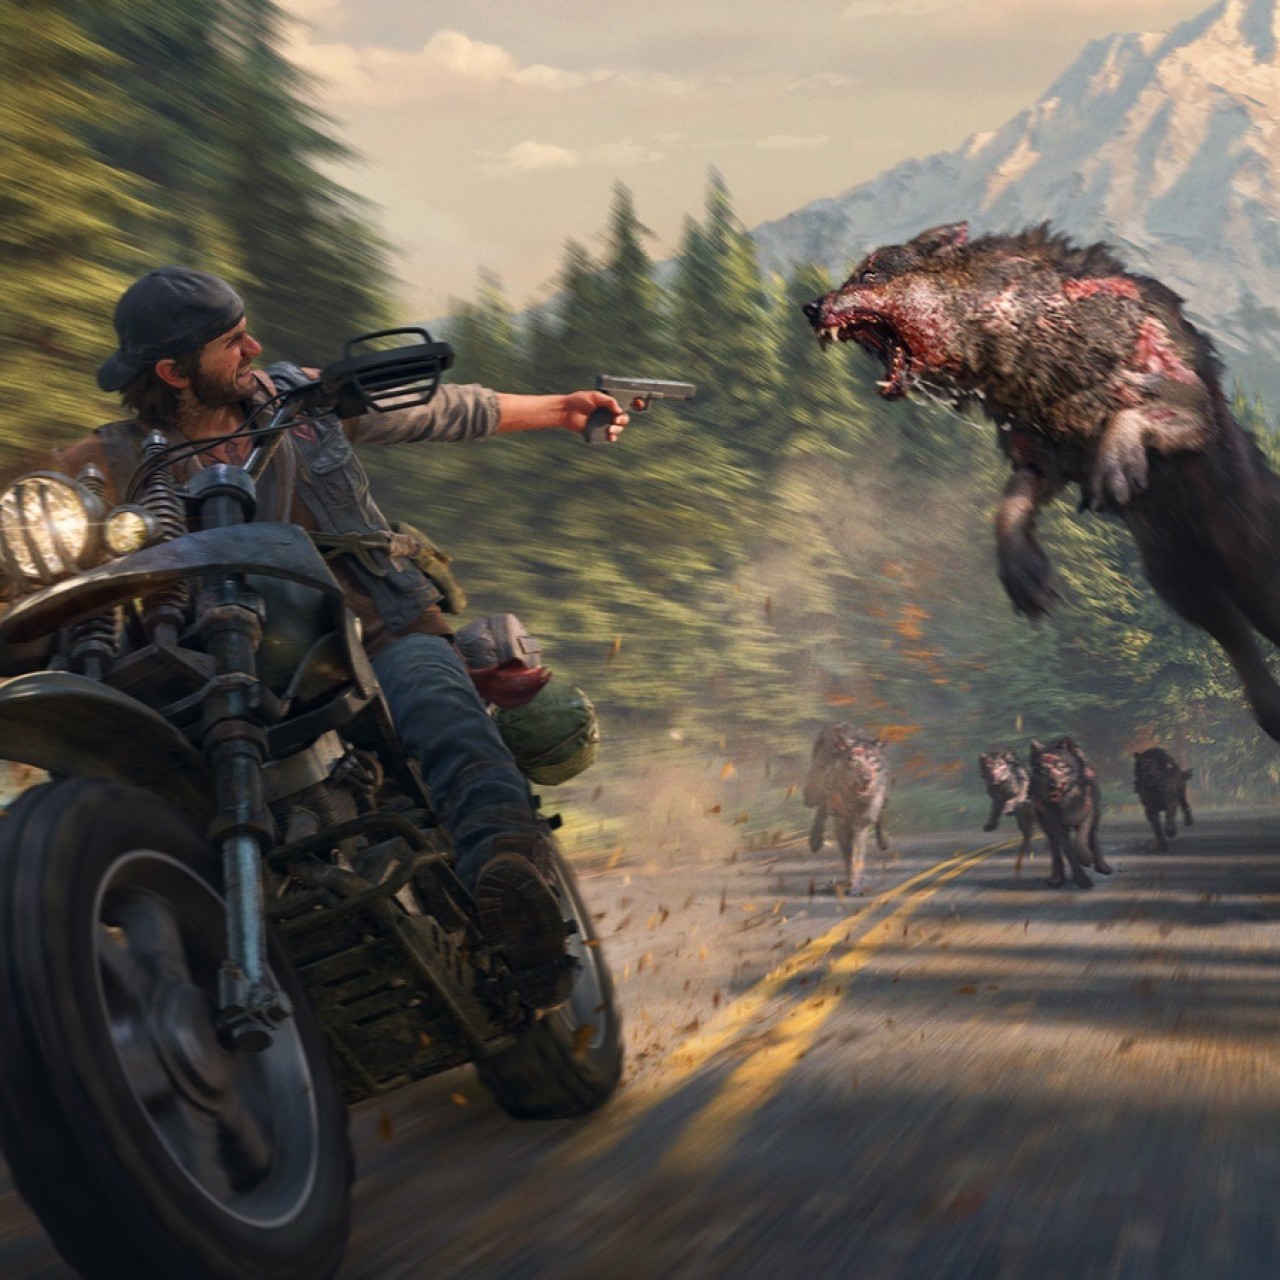 Days Gone' game review: PlayStation exclusive makes the zombie